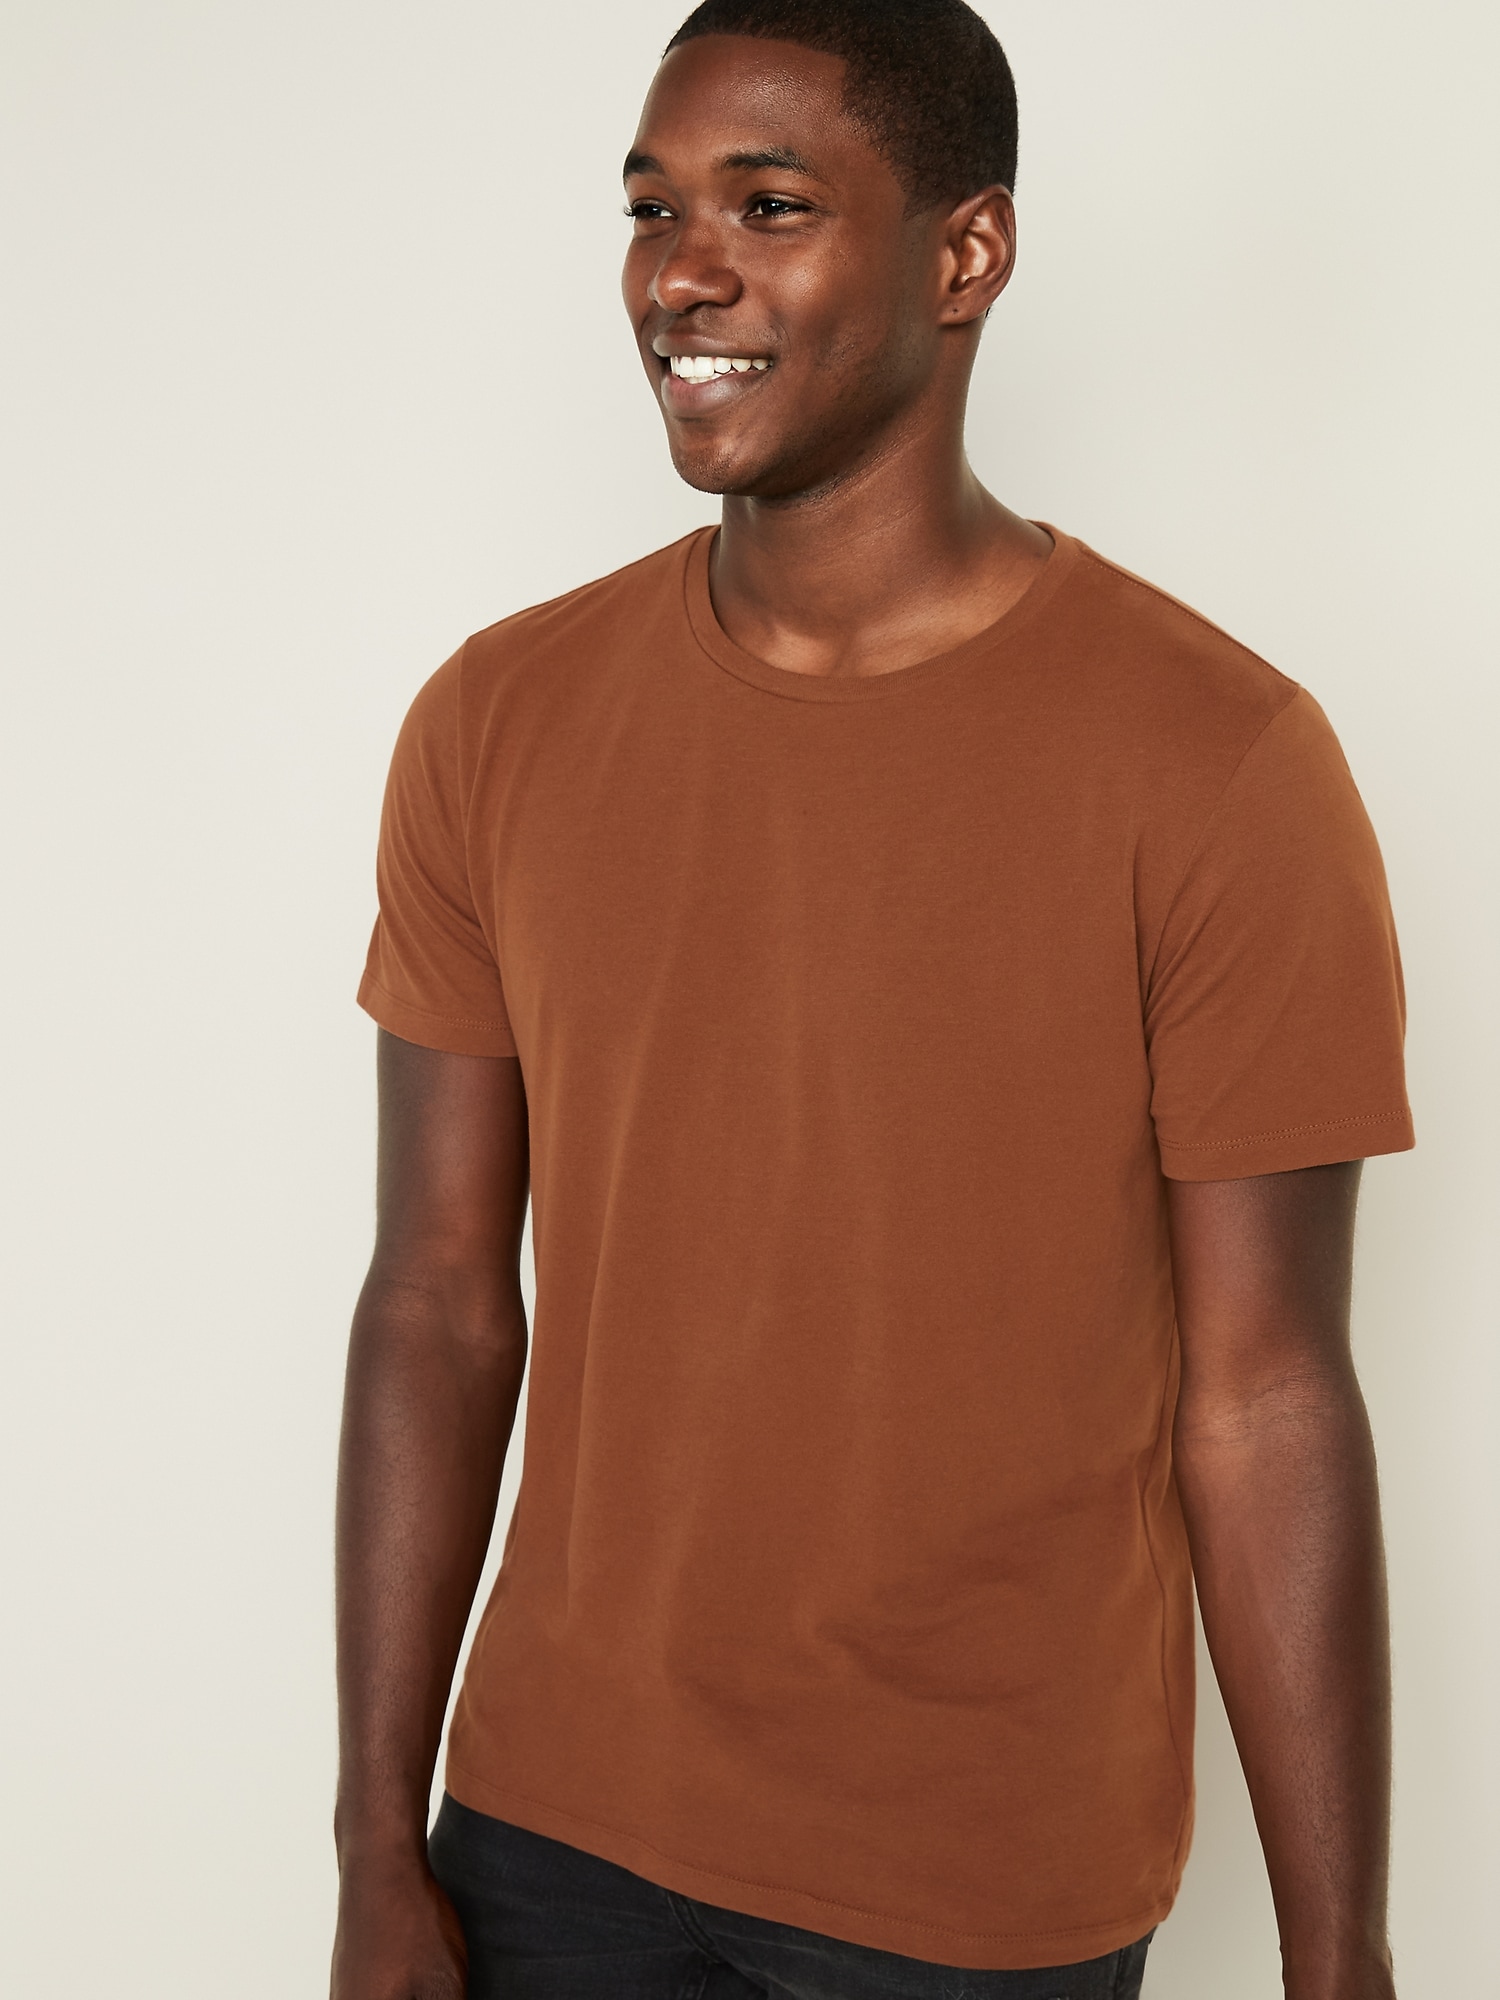 Soft-Washed Crew-Neck T-Shirt for Men